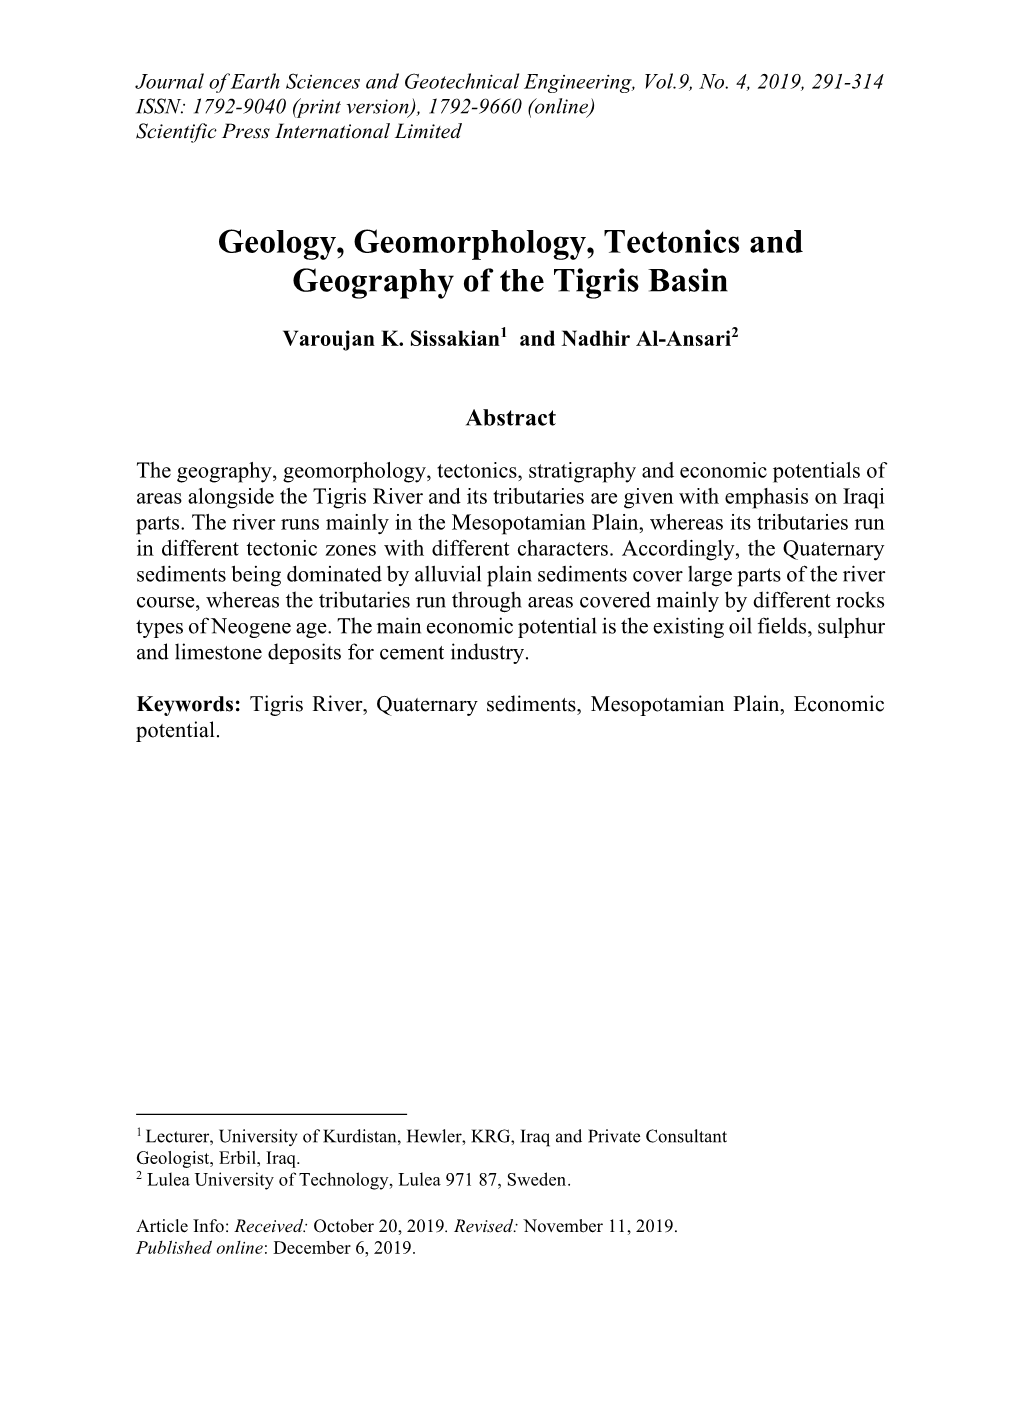 Geology, Geomorphology, Tectonics and Geography of the Tigris Basin